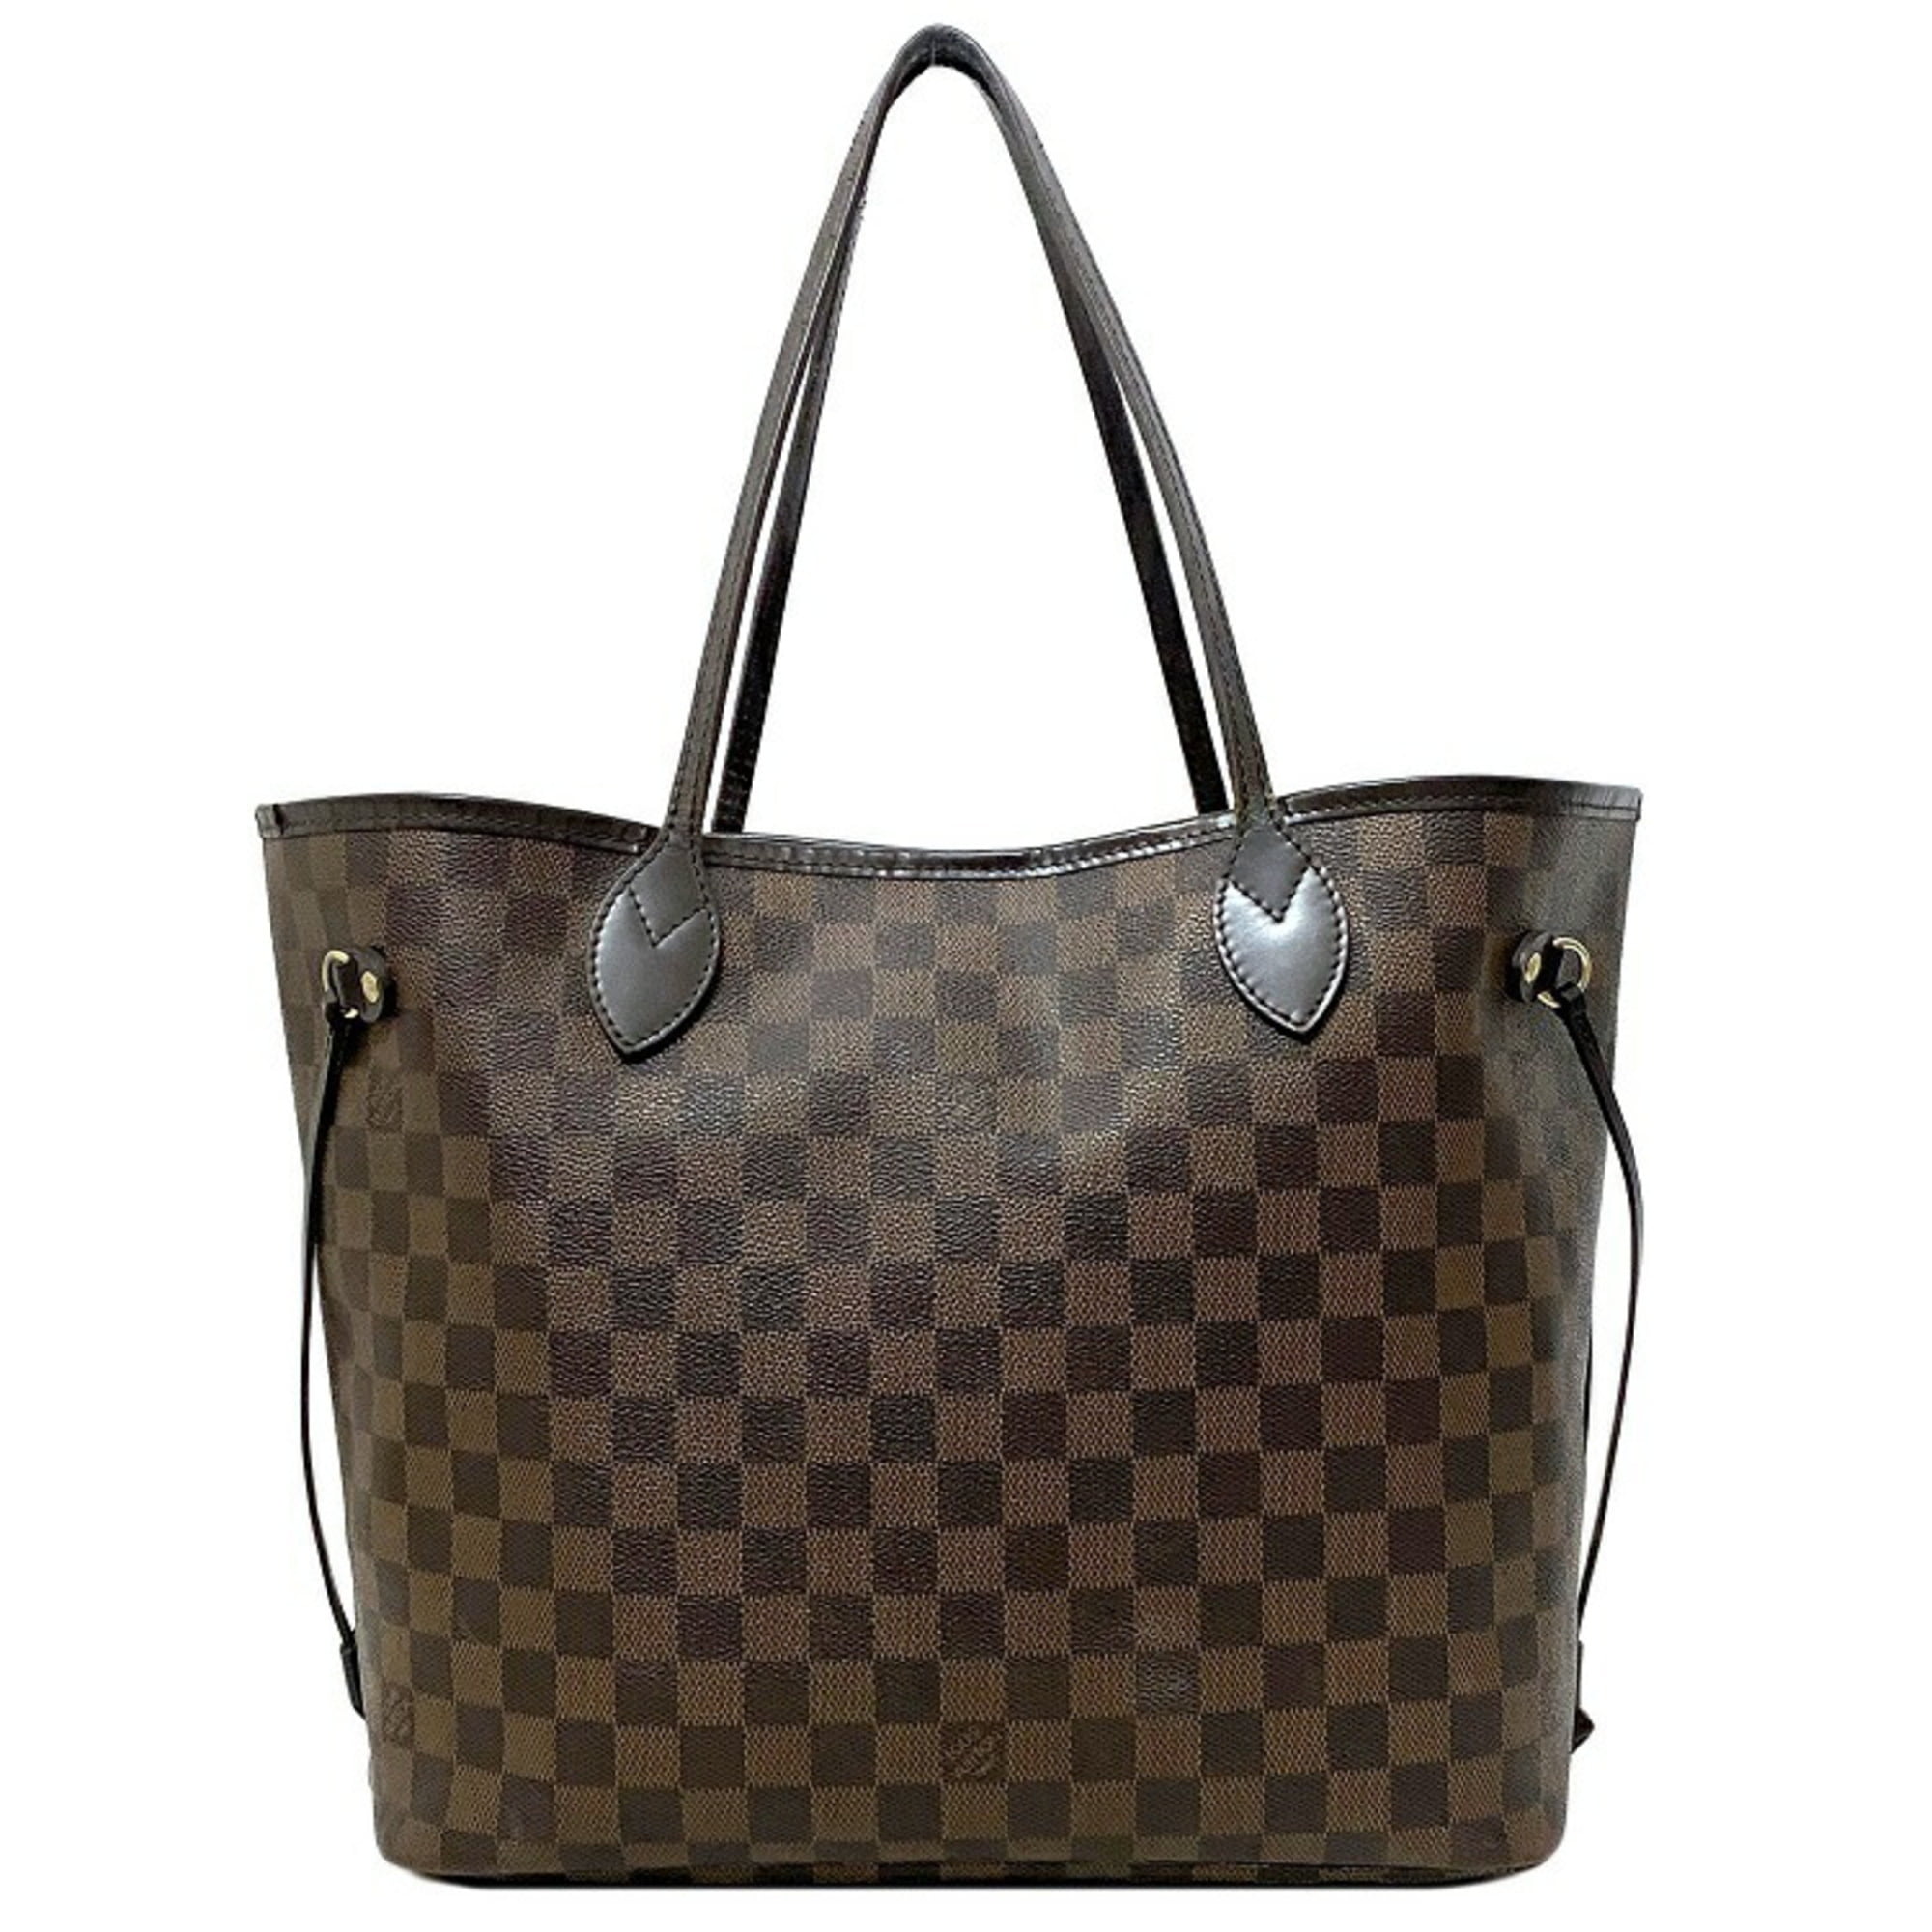 Auth Louis Vuitton Damier Ebene Neverfull MM Tote Bag Brown N51105 Used